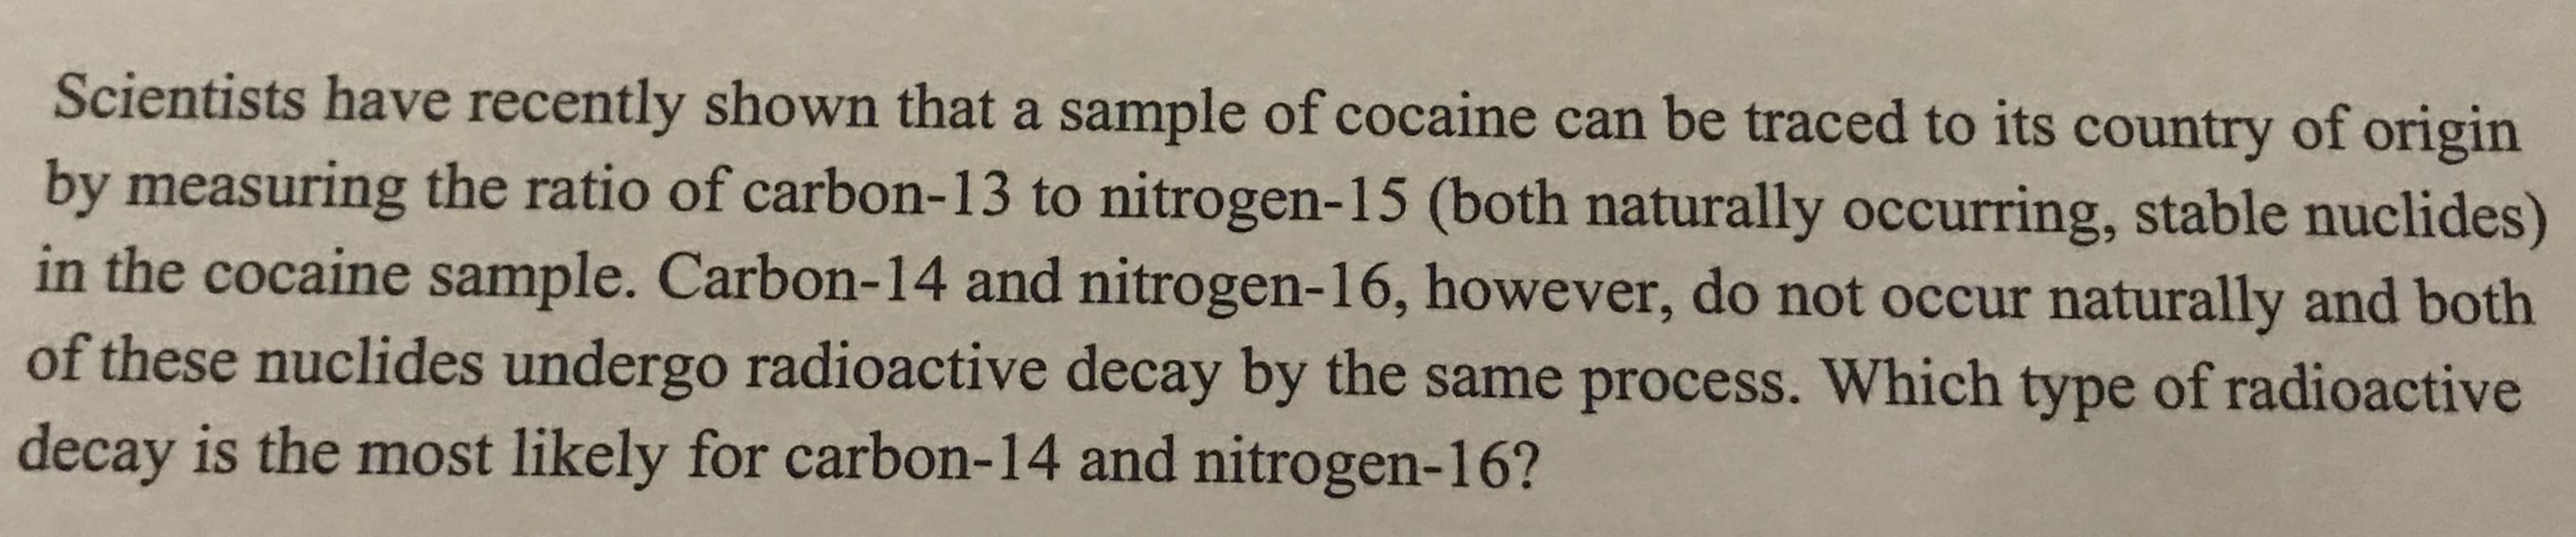 Scientists have recently shown that a sample of cocaine can be traced to its country of origin
by measuring the ratio of carbon-13 to nitrogen-15 (both naturally occurring, stable nuclides)
in the cocaine sample. Carbon-14 and nitrogen-16, however, do not occur naturally and both
of these nuclides undergo radioactive decay by the same process. Which type of radioactive
decay is the most likely for carbon-14 and nitrogen-16?
